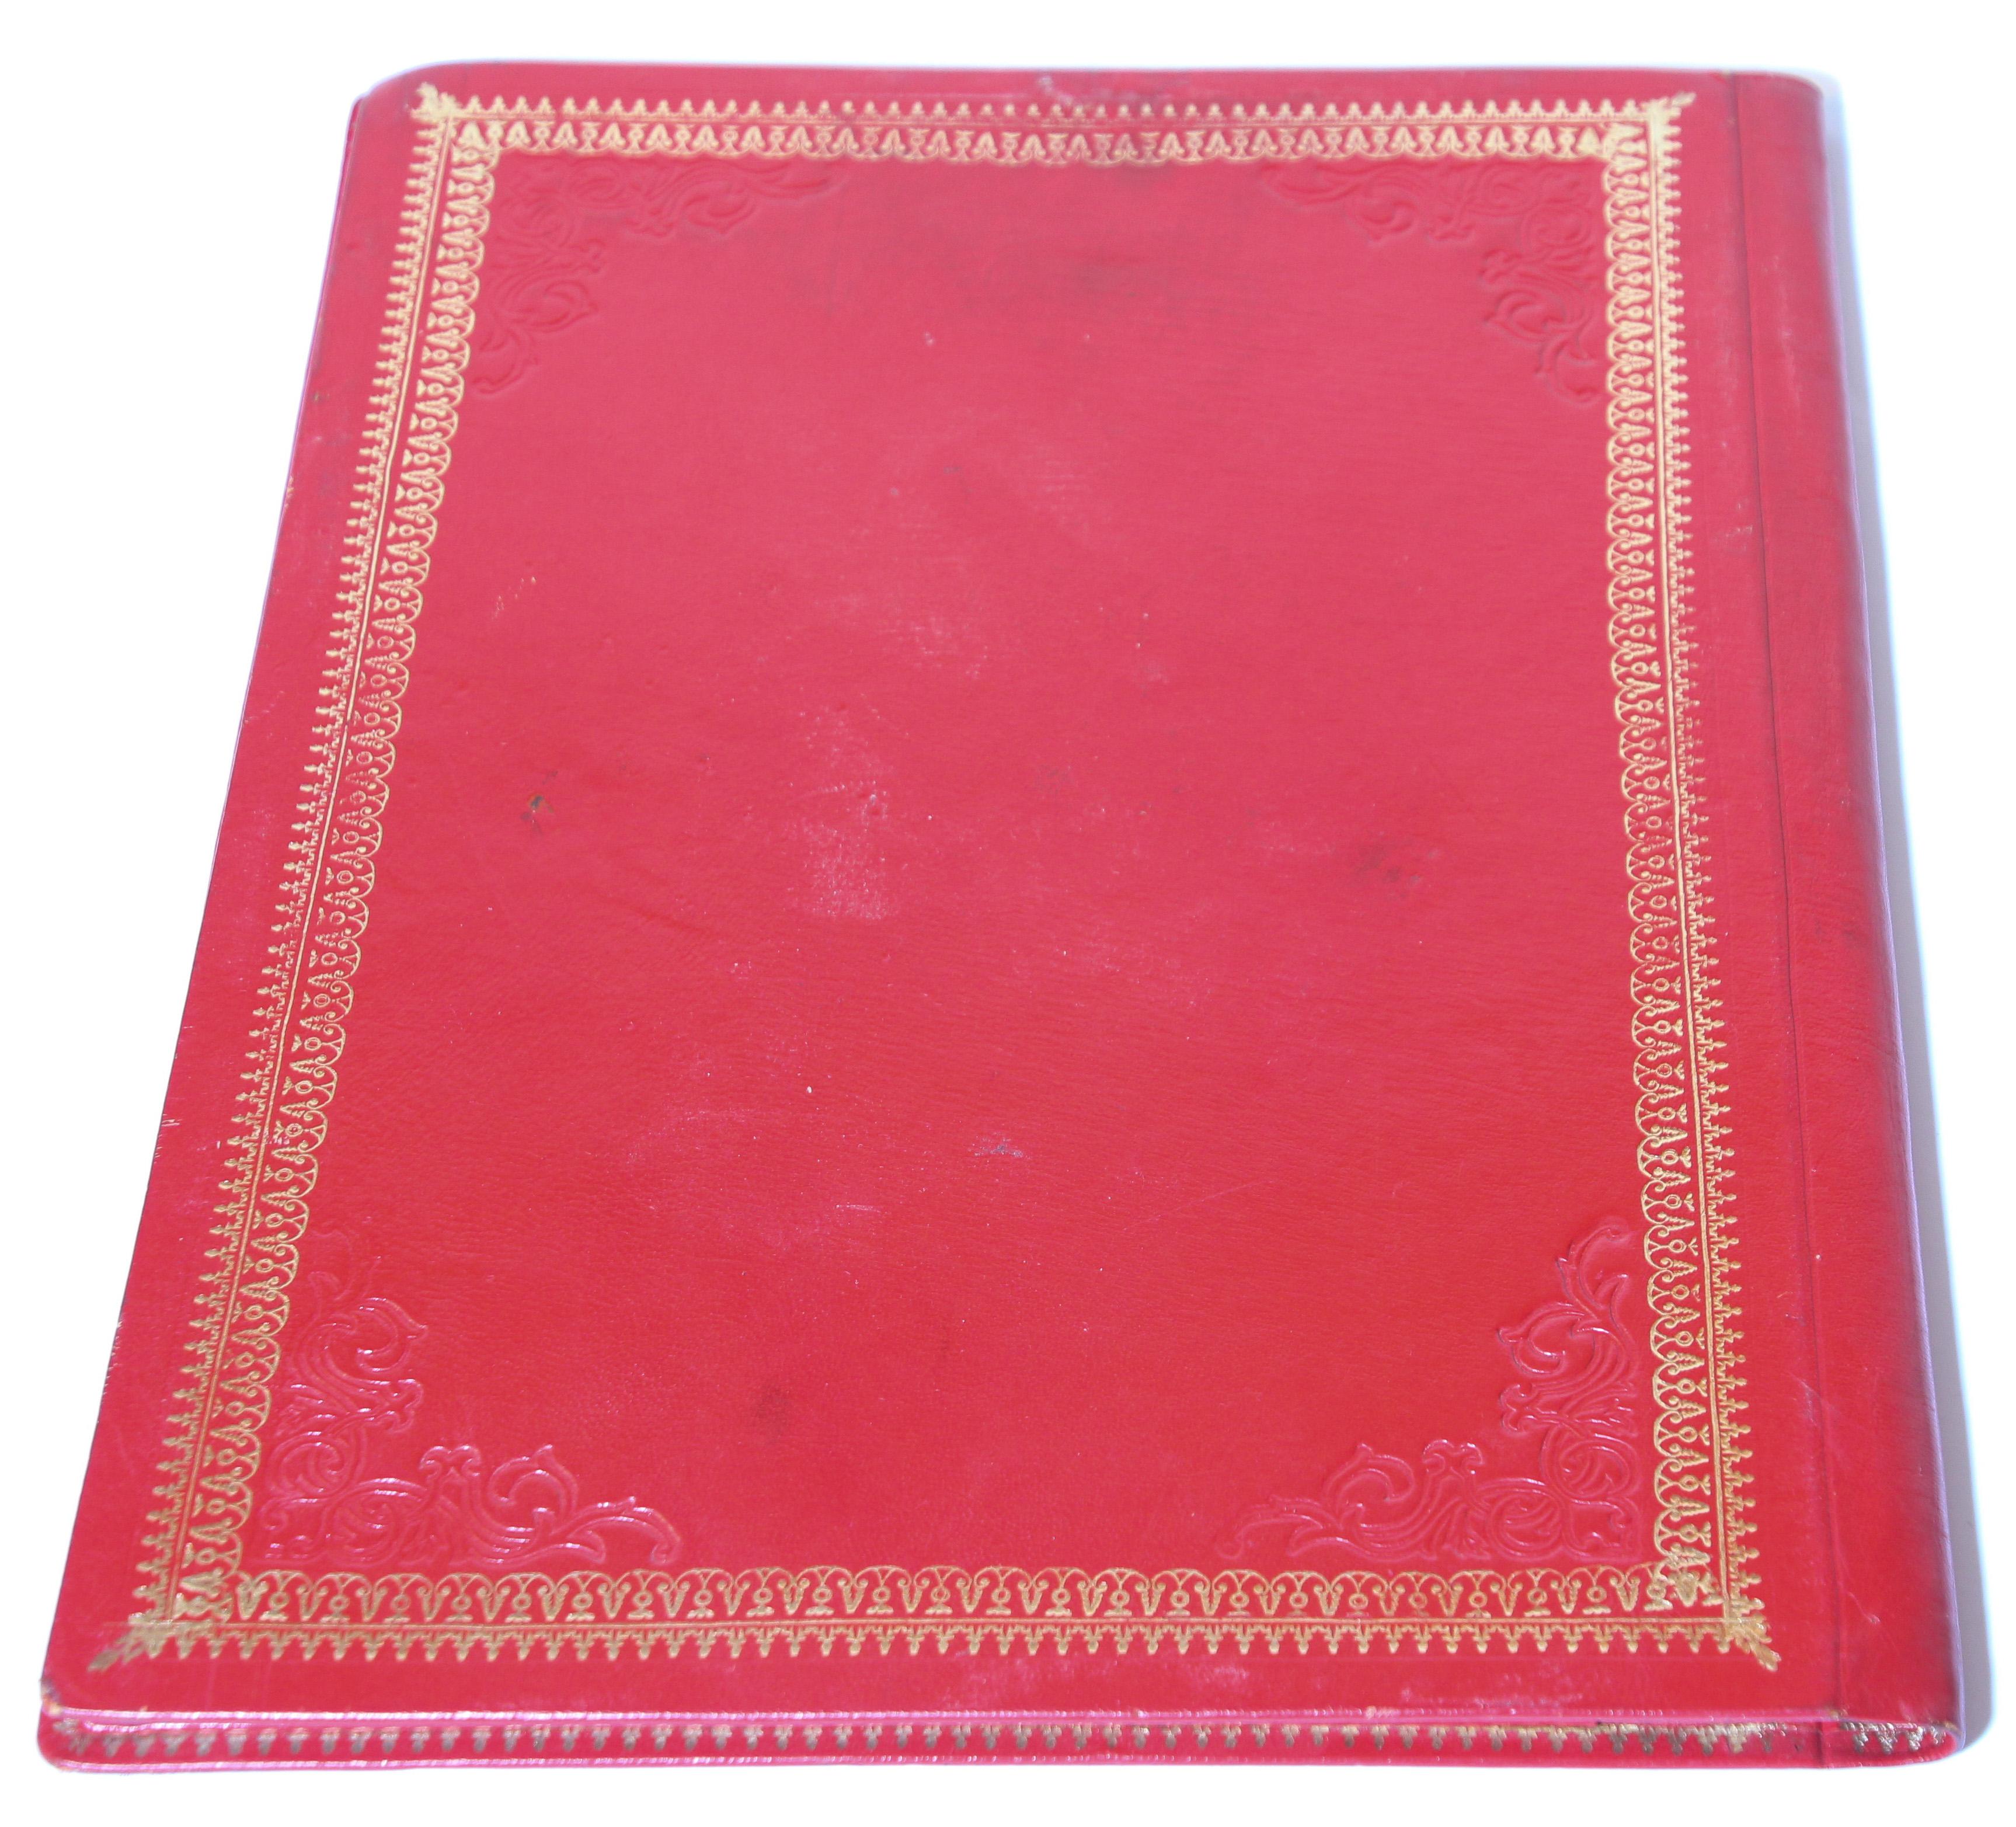 Vintage Moroccan Embossed Leather Padfolio For Sale 2